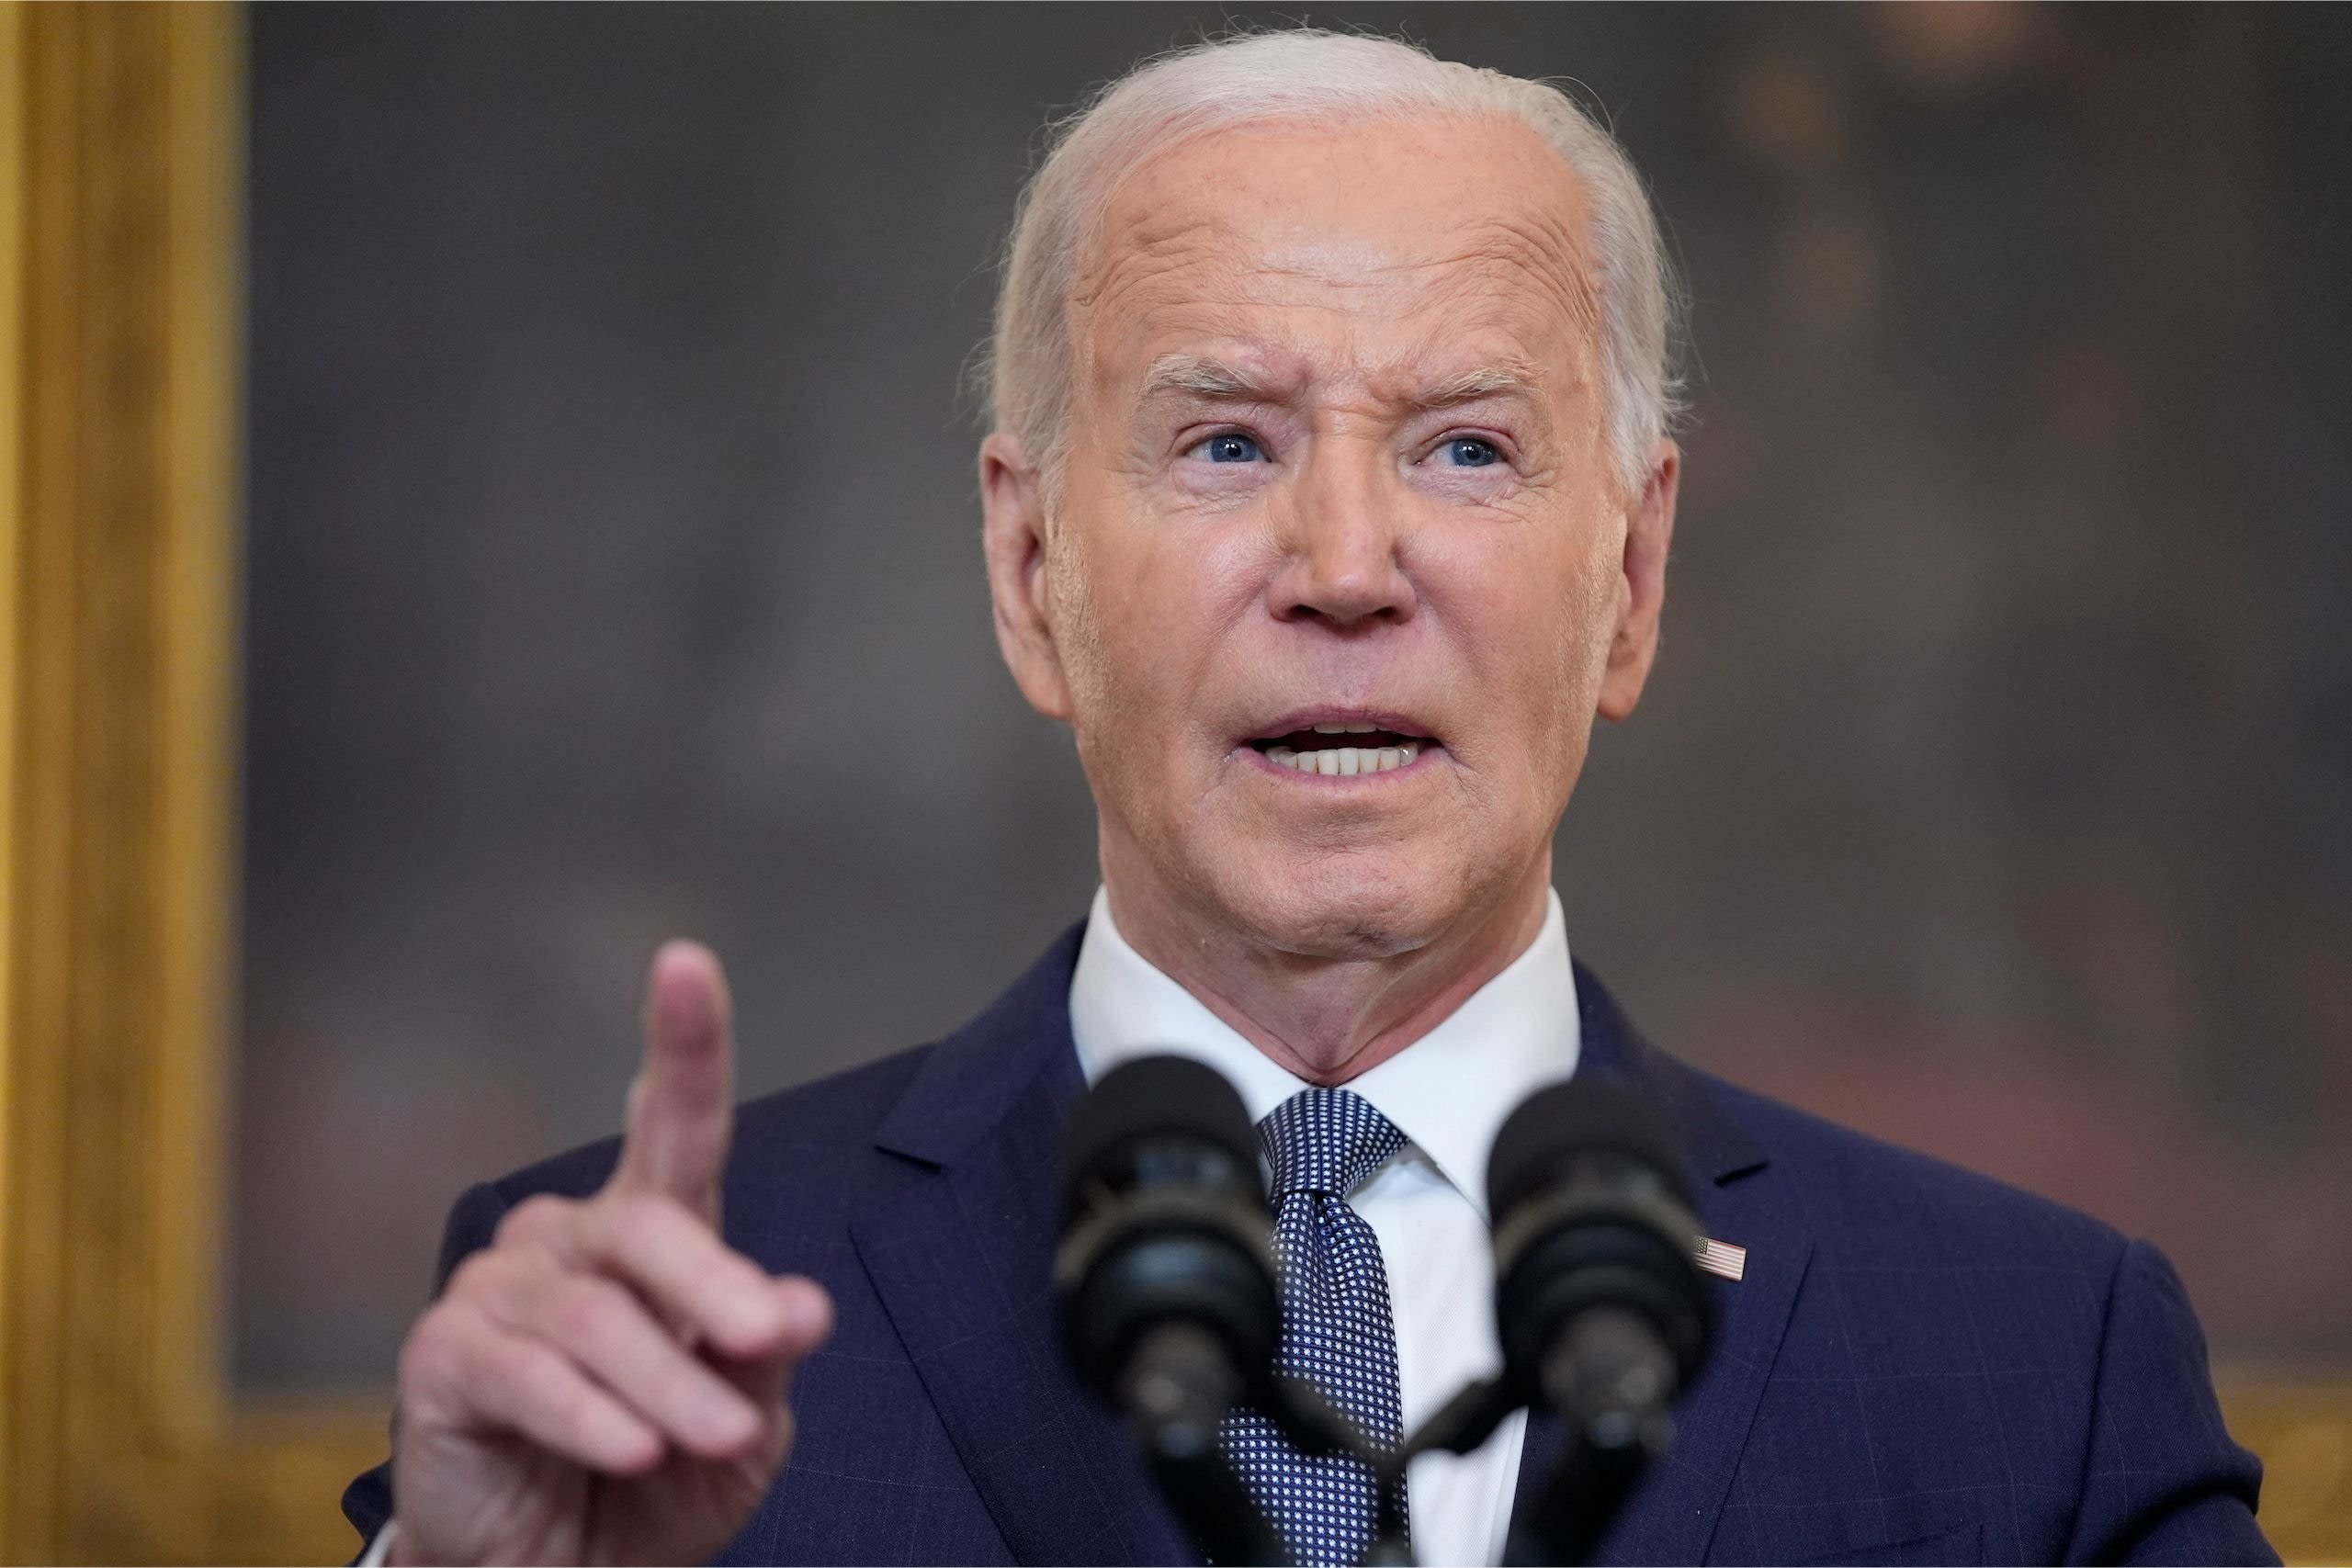 Biden details a 3-phase hostage deal aimed at winding down the Israel-Hamas war